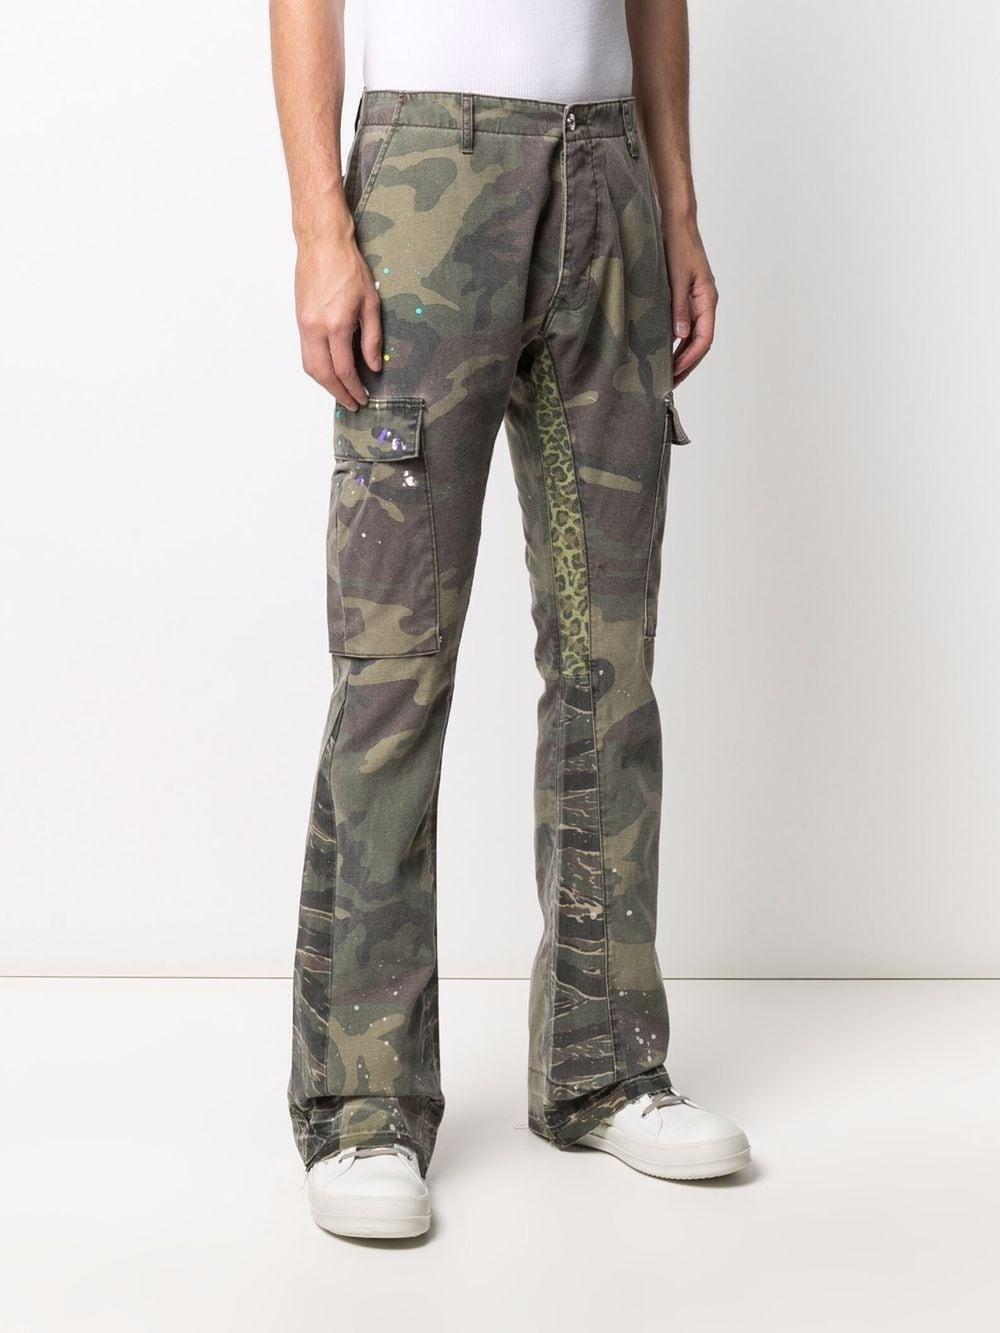 New York Ripstop Cargo Trousers Camouflage Men's Camo Leisure Pants Dickies 